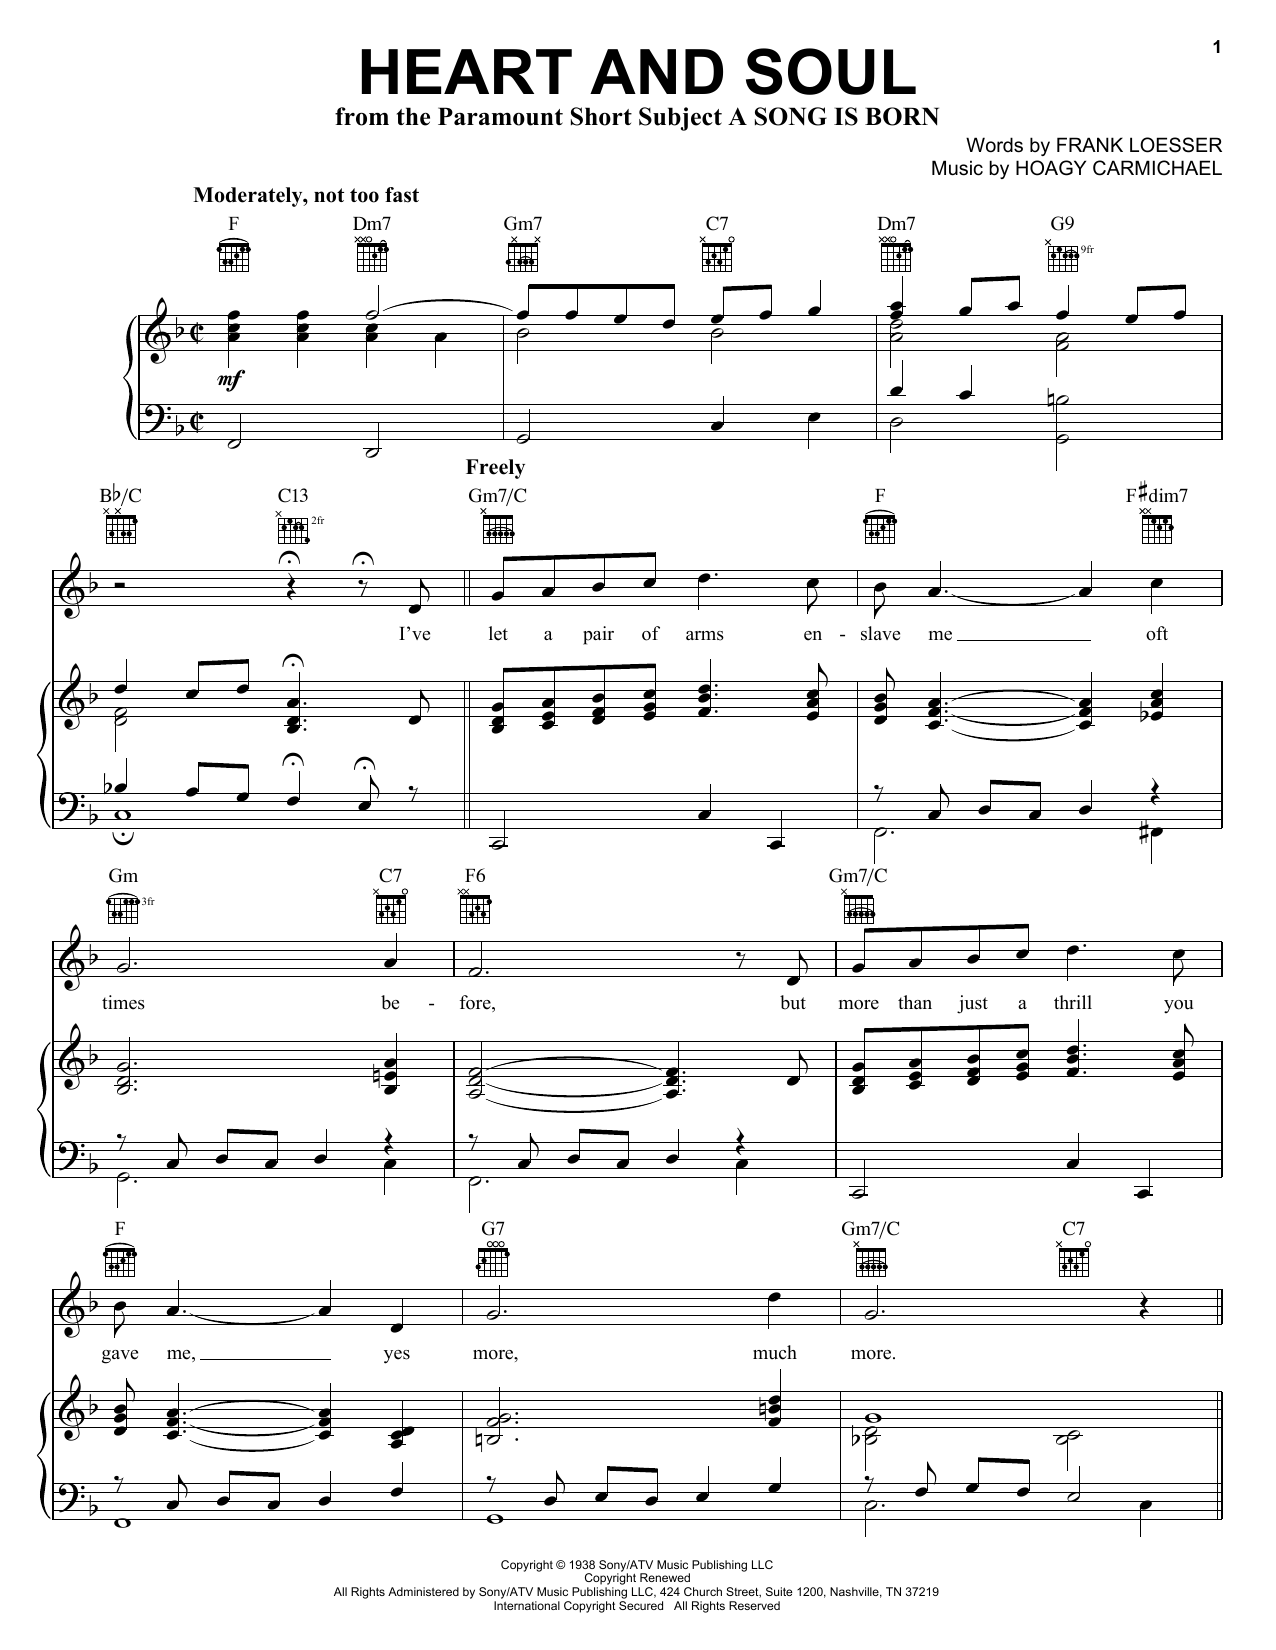 Heart And Soul Sheet Music Pdf Epic Sheet Music - heart and soul big by hoagy carmichael on a roblox piano